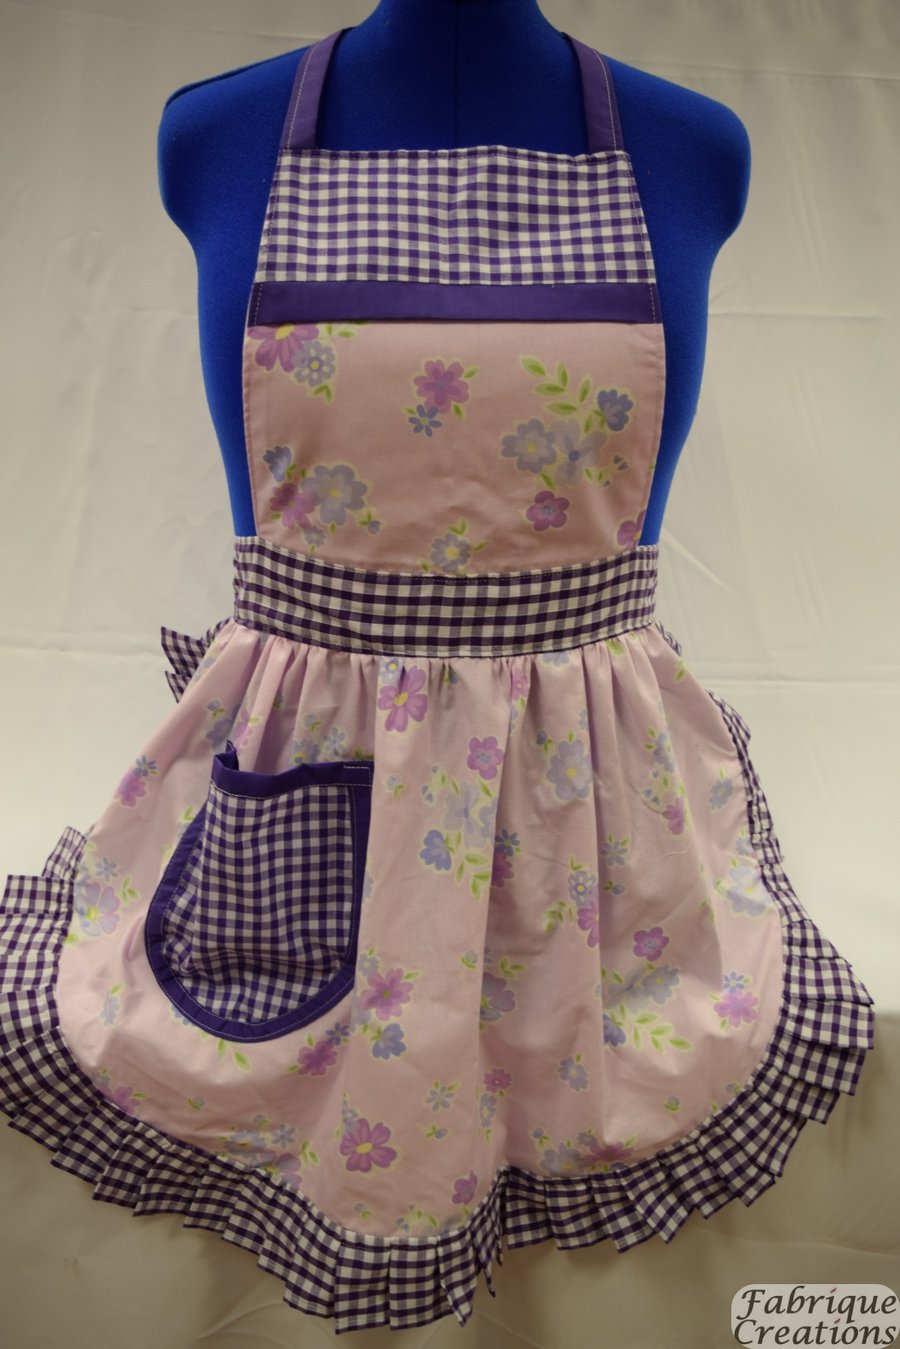 Vintage 50s Style Full Apron Pinny - Lilac Flowers with Purple Gingham Trim